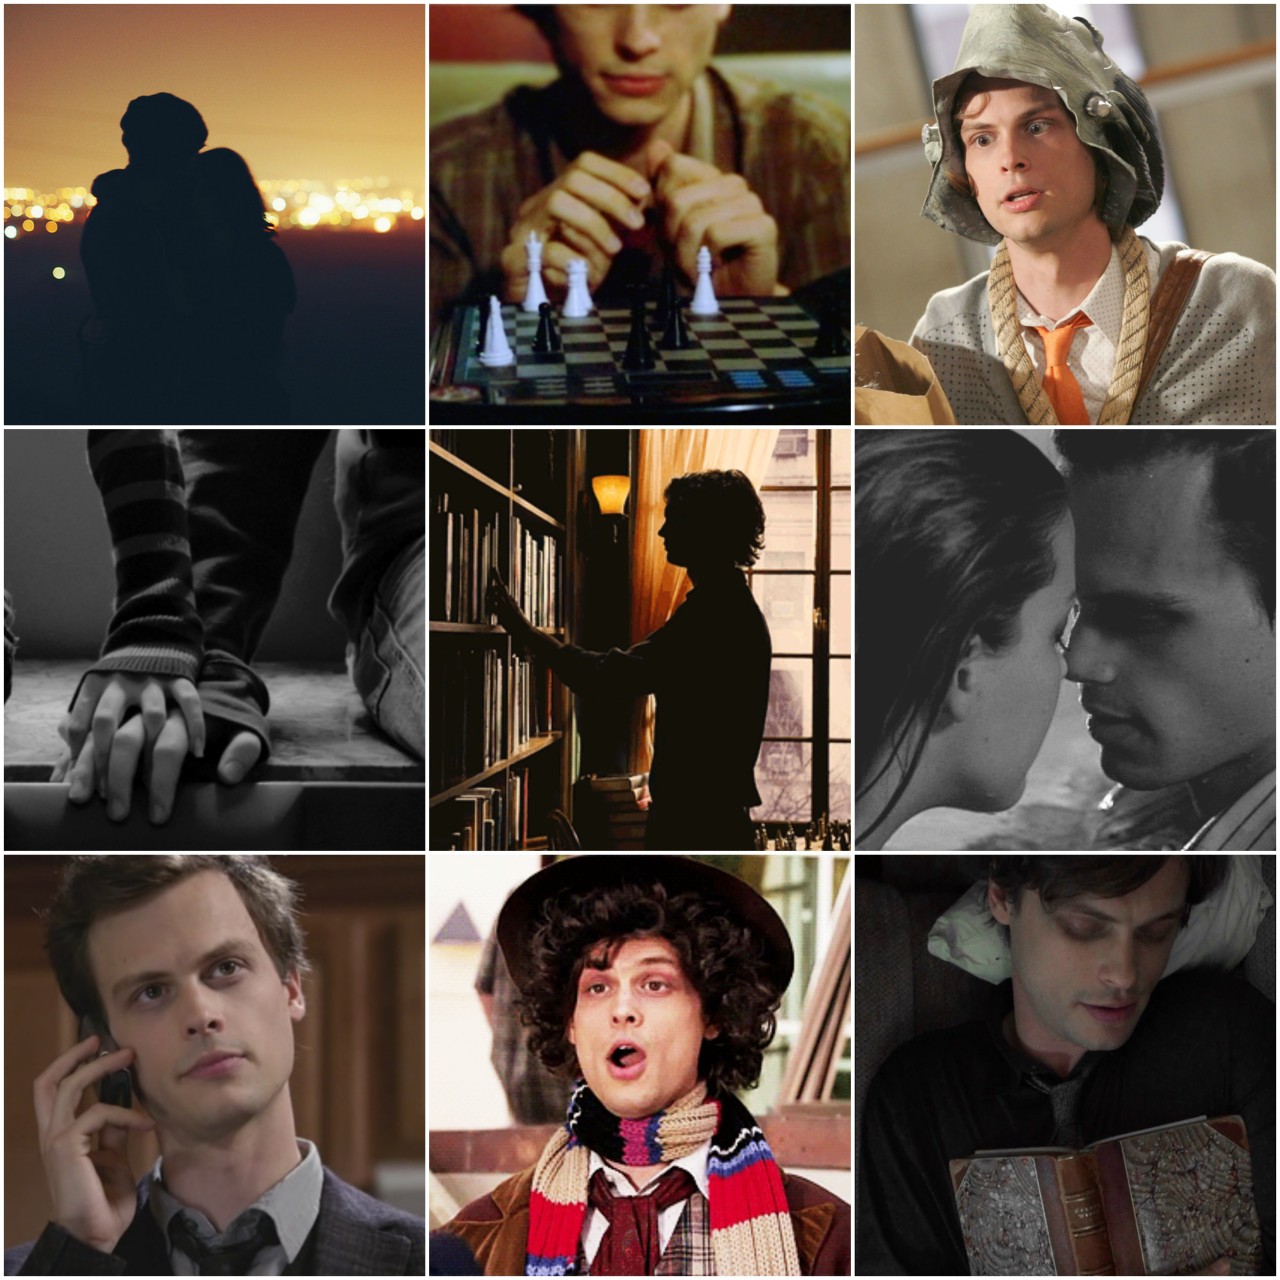 Dating Spencer Reid would include:
• Intimate dates in secluded areas
• Lots of chess games
• Fun Halloweens
• Constant hand holding
• Him reading all his books to you
• Intense kissing sessions
• Long distance phone calls
• Cosplaying as his...